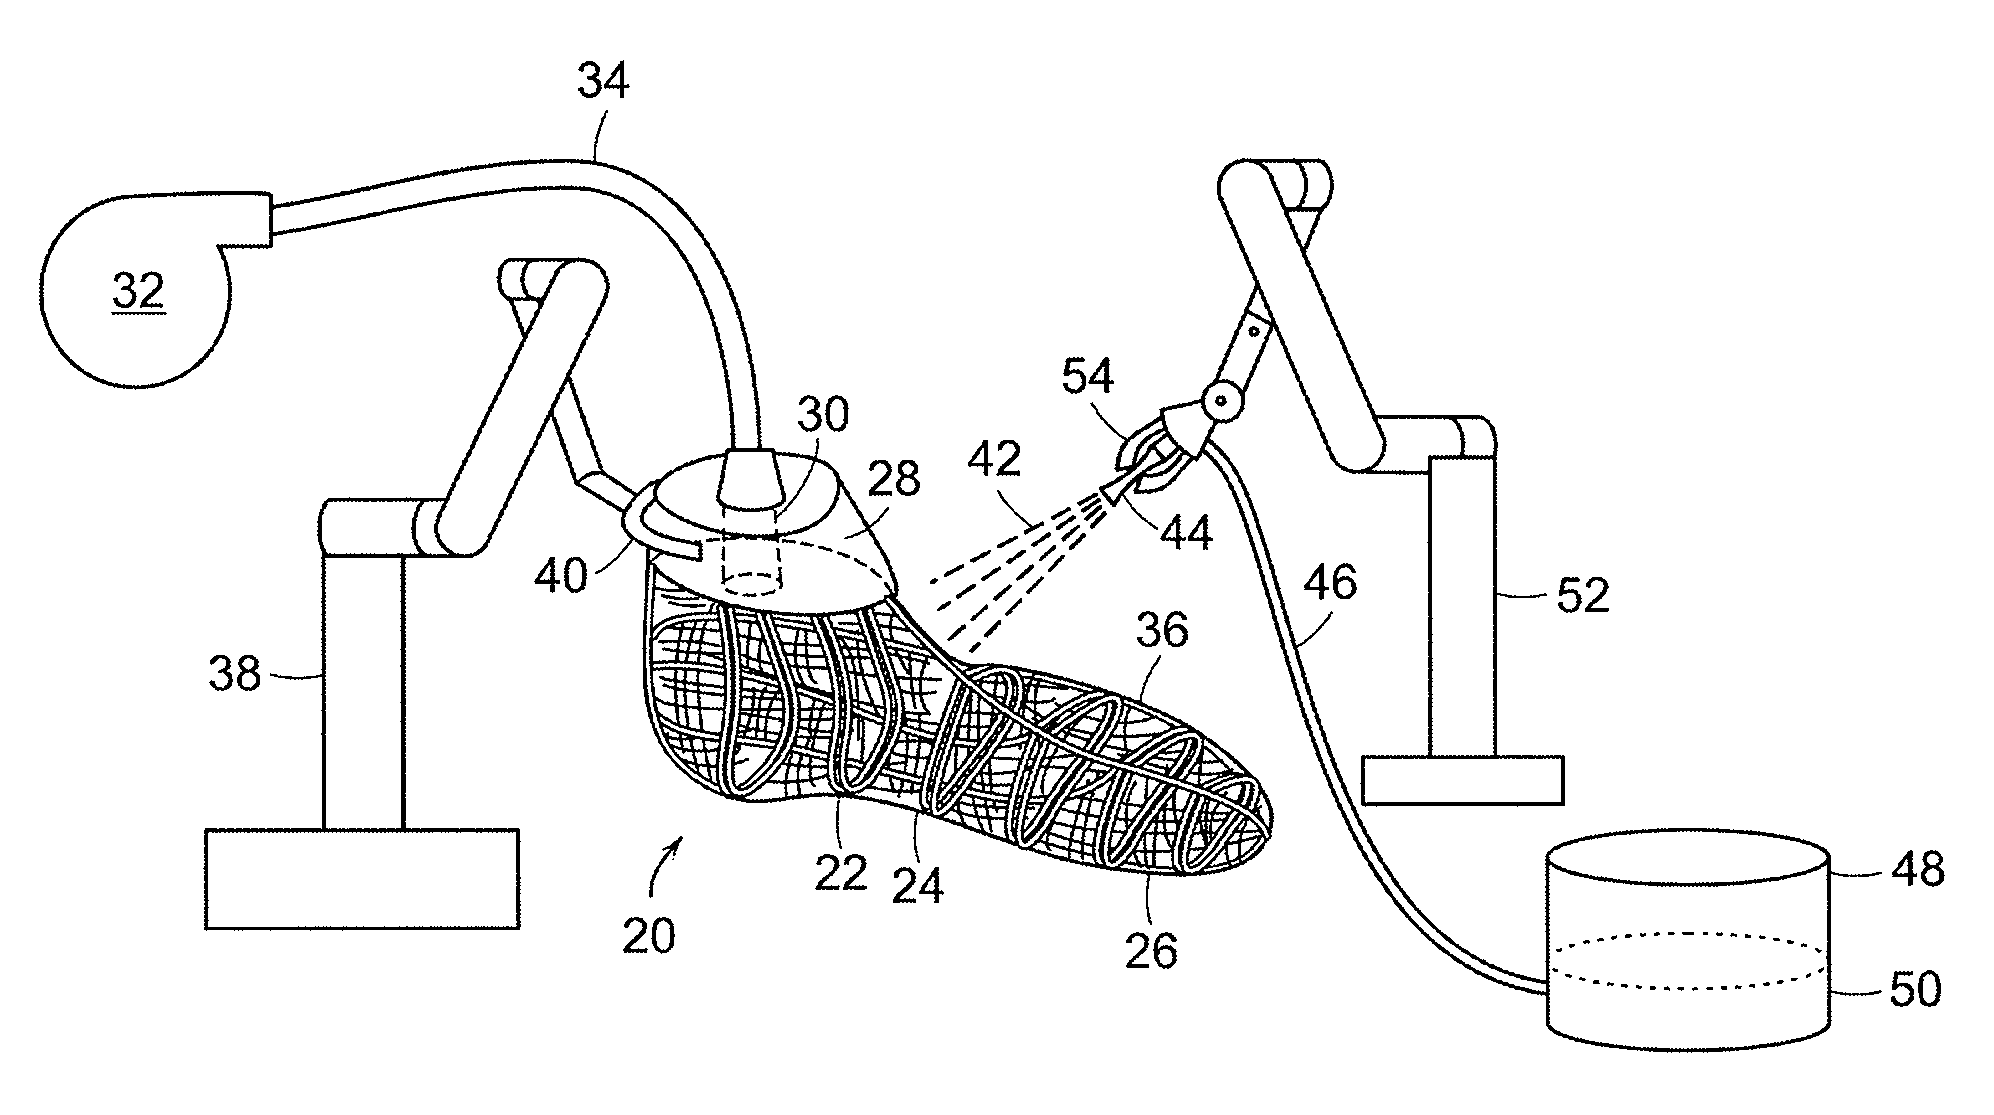 Article of Footwear of Nonwoven Material and Method of Manufacturing Same